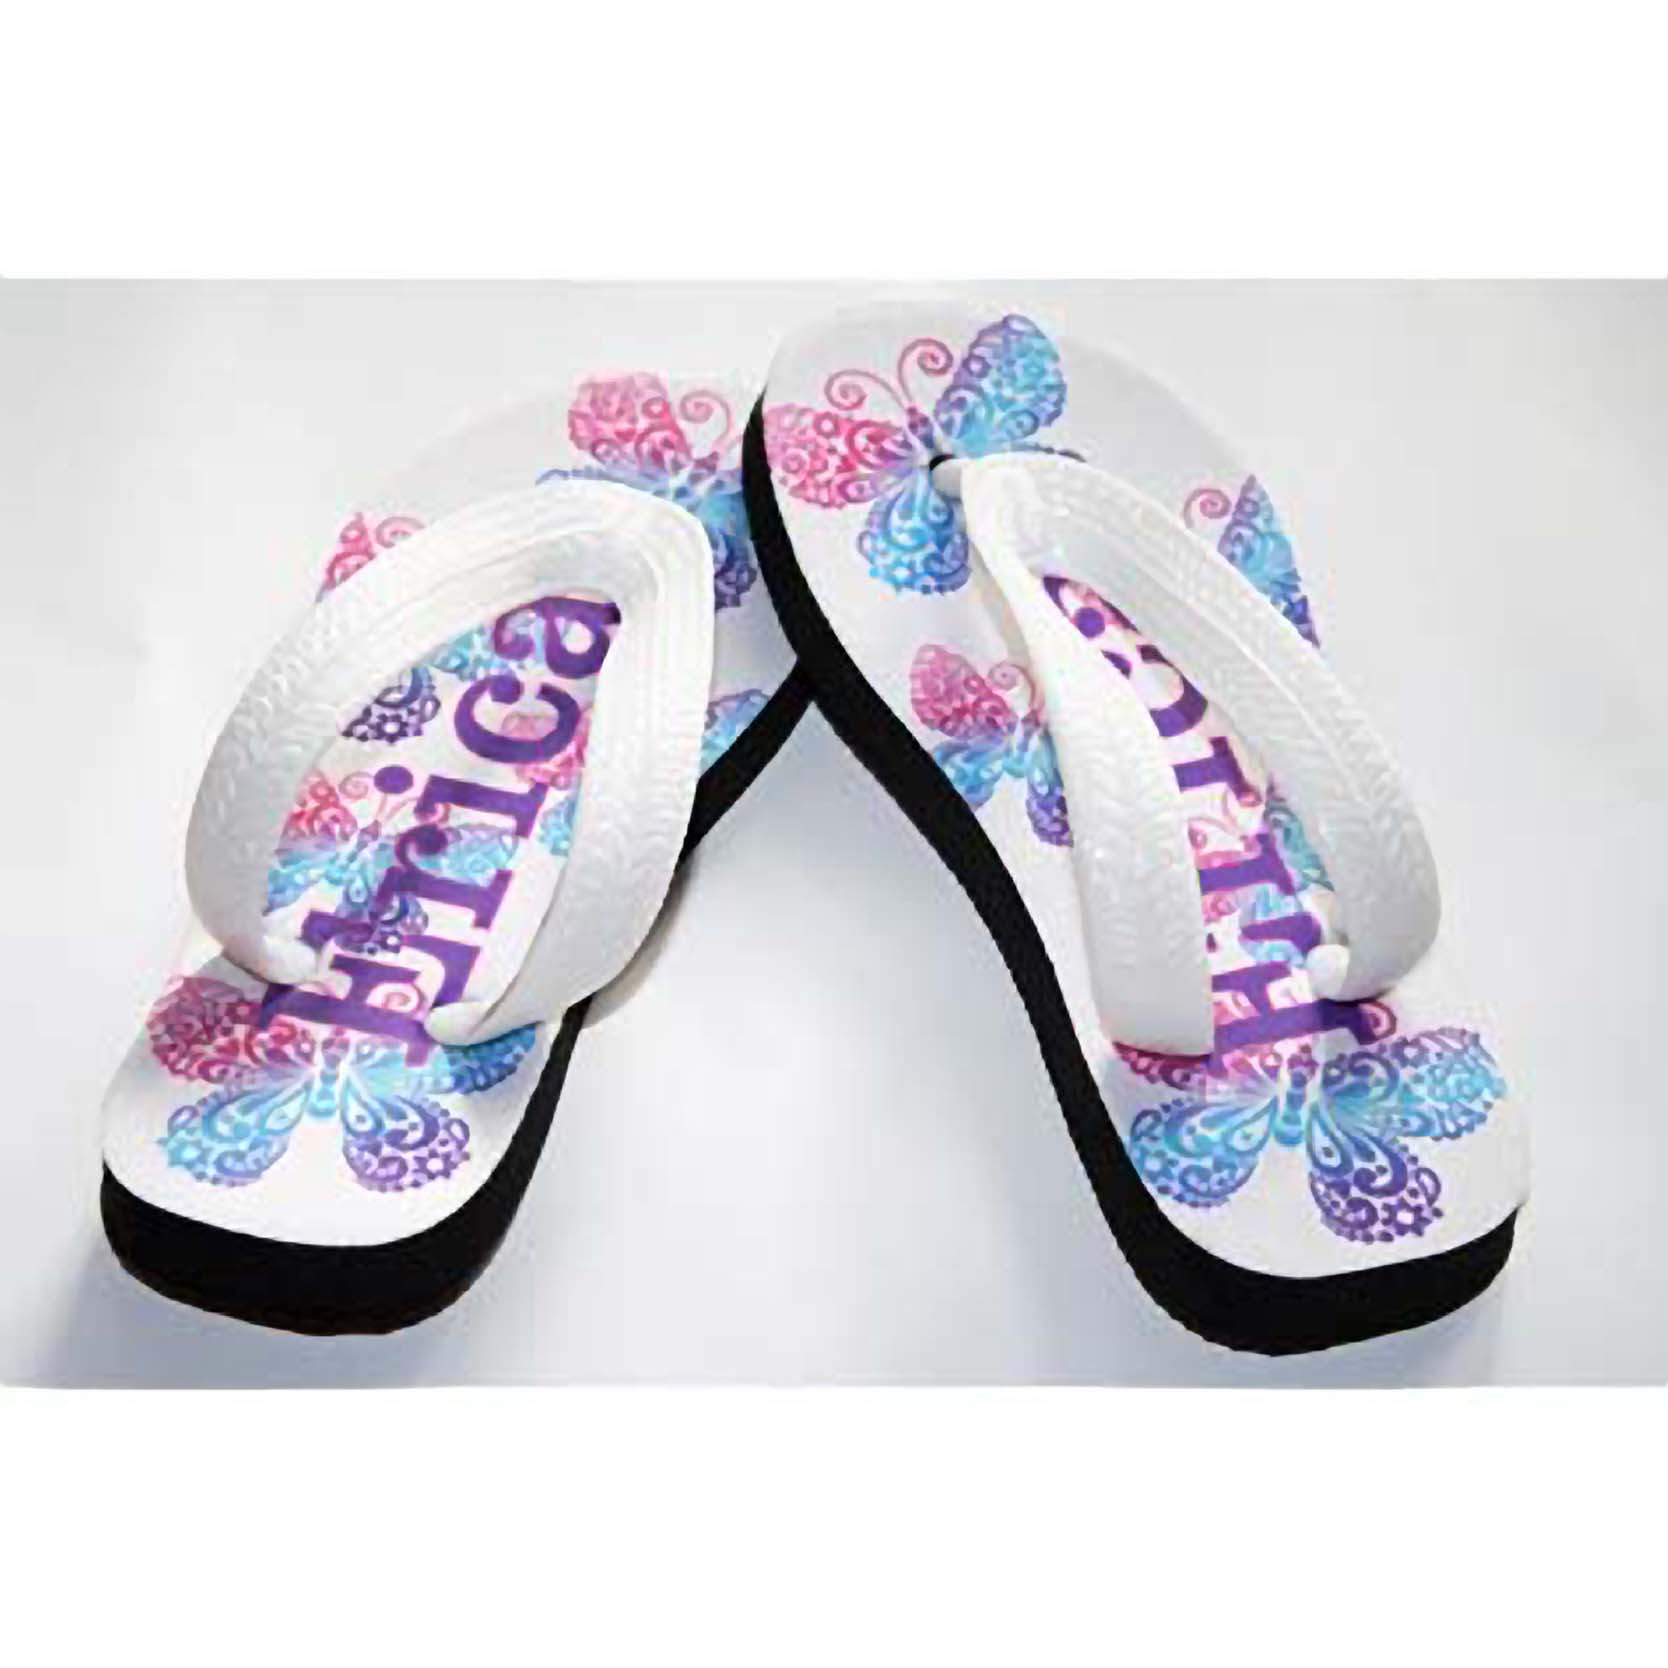 Children's Butterfly Flip Flops made with sublimation printing